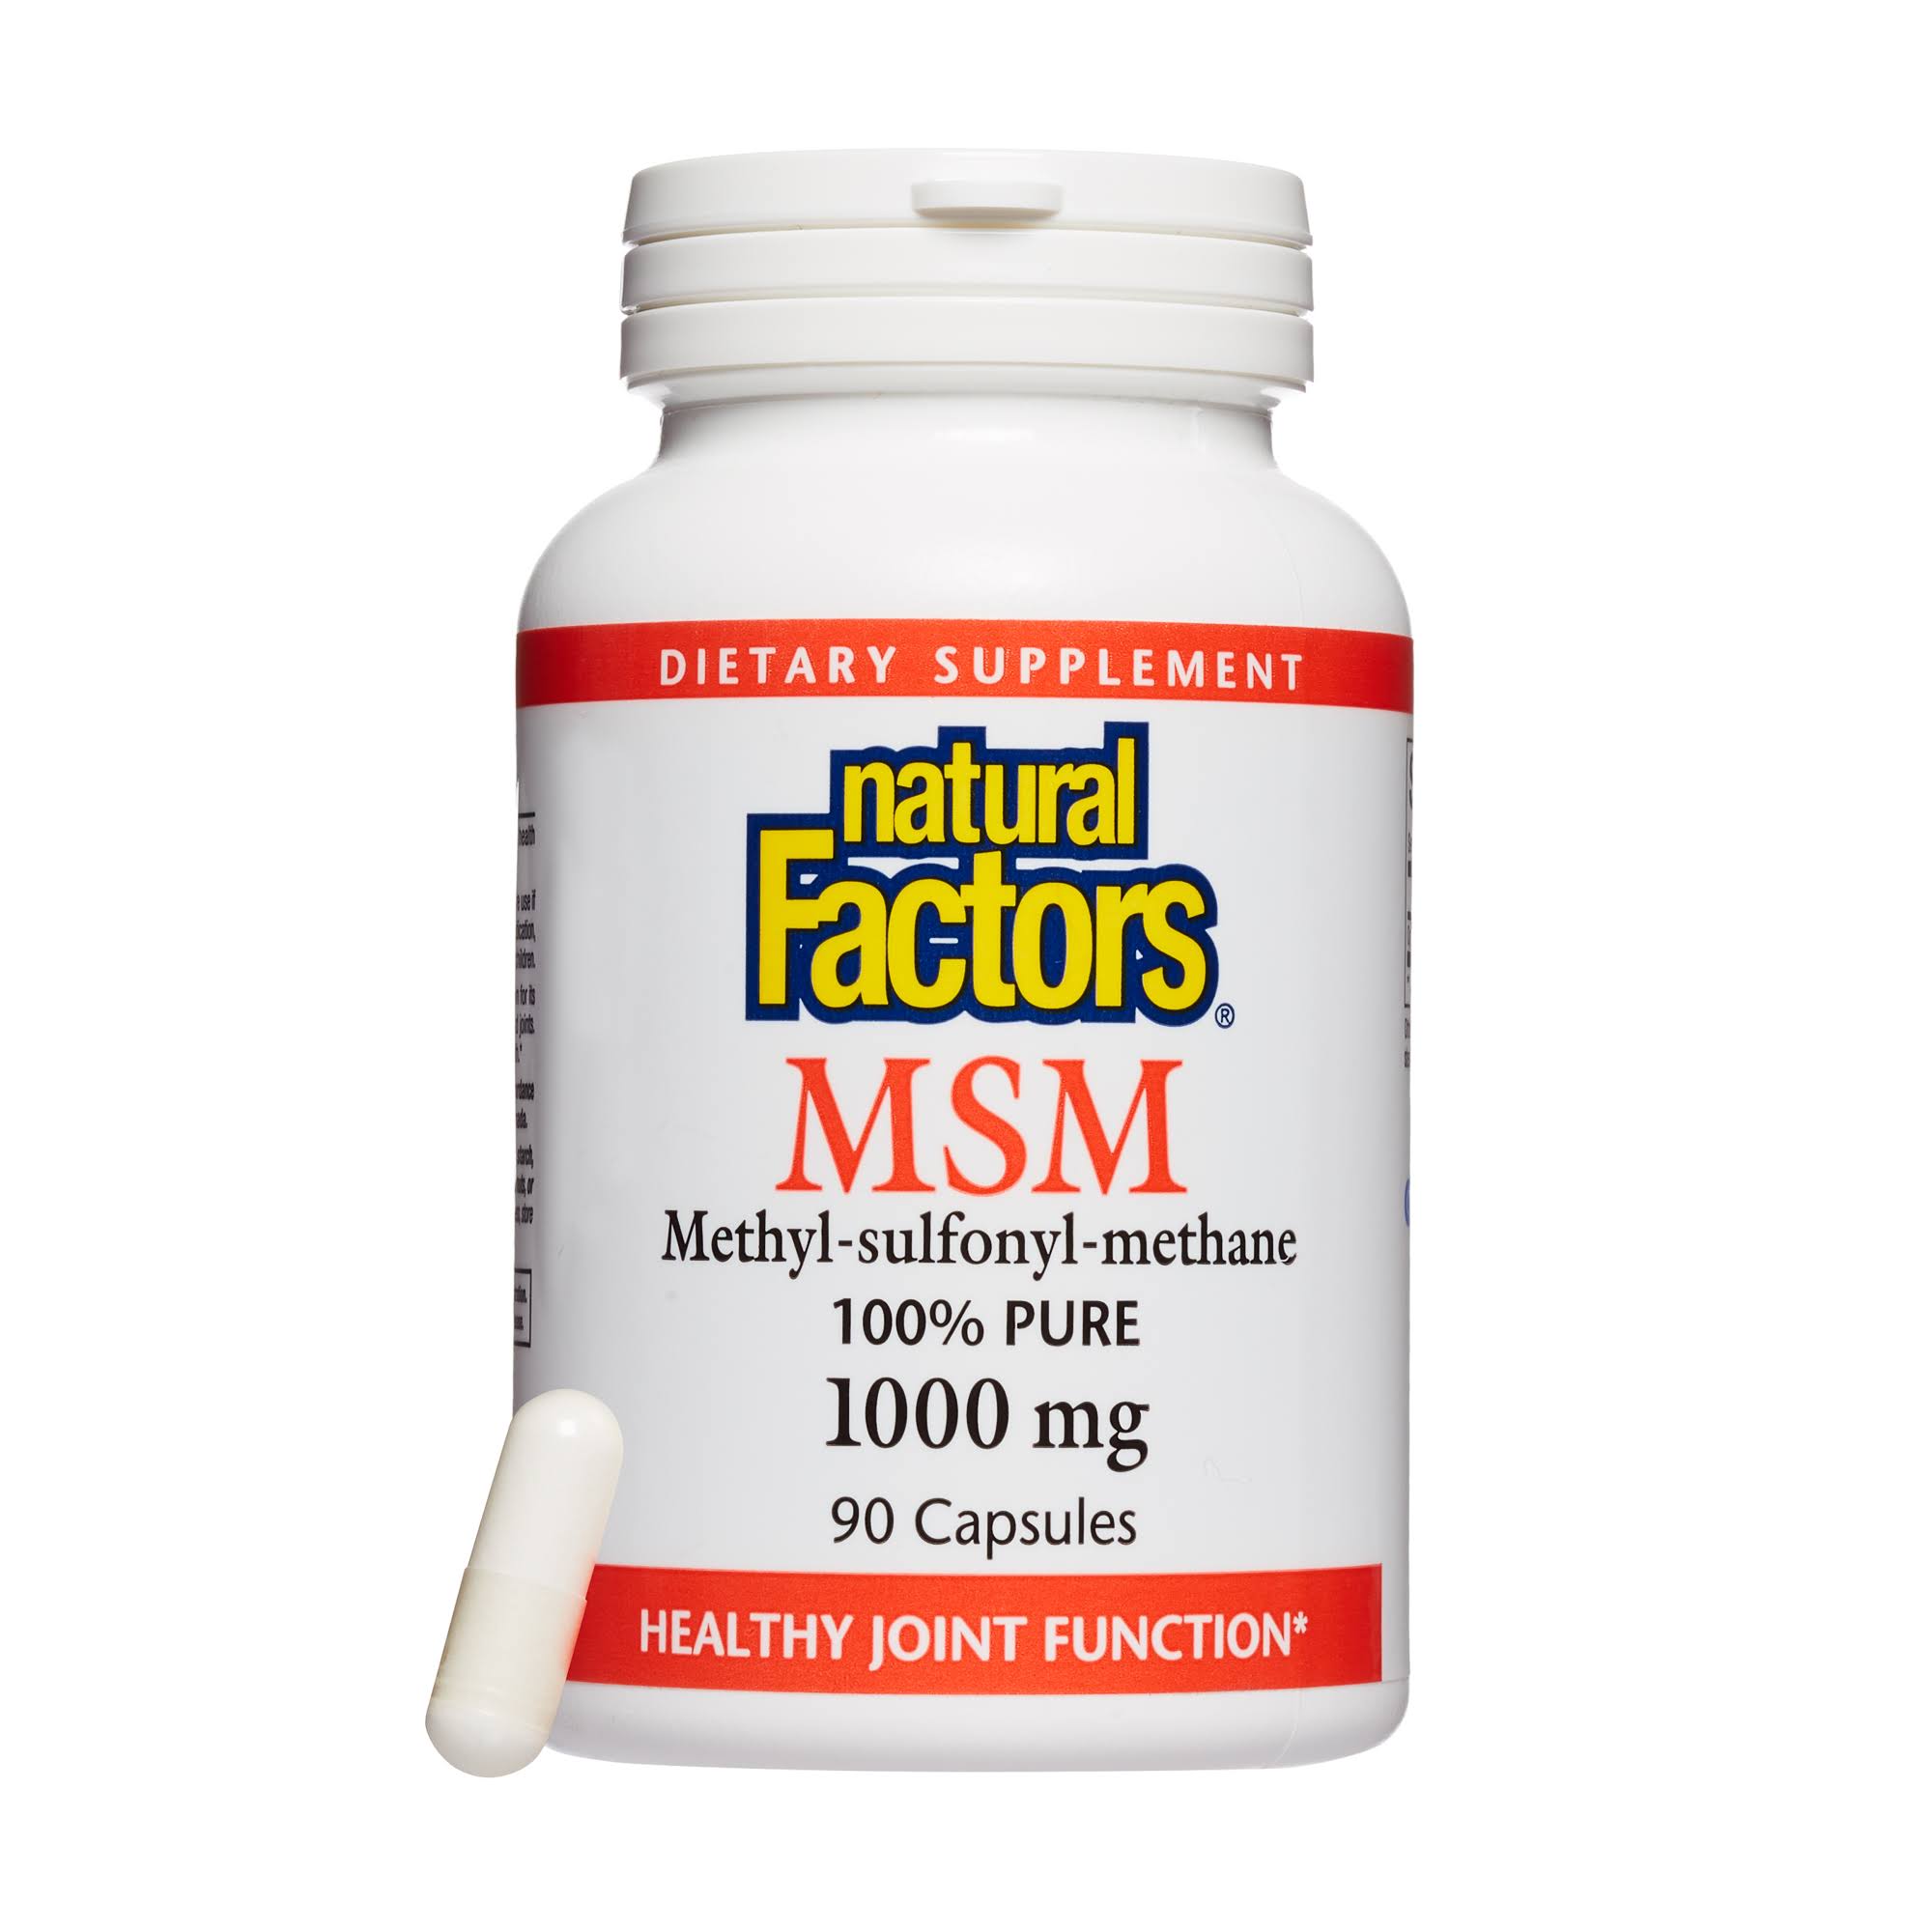 Natural Factors MSM Dietary Supplement - 1000mg, 90ct